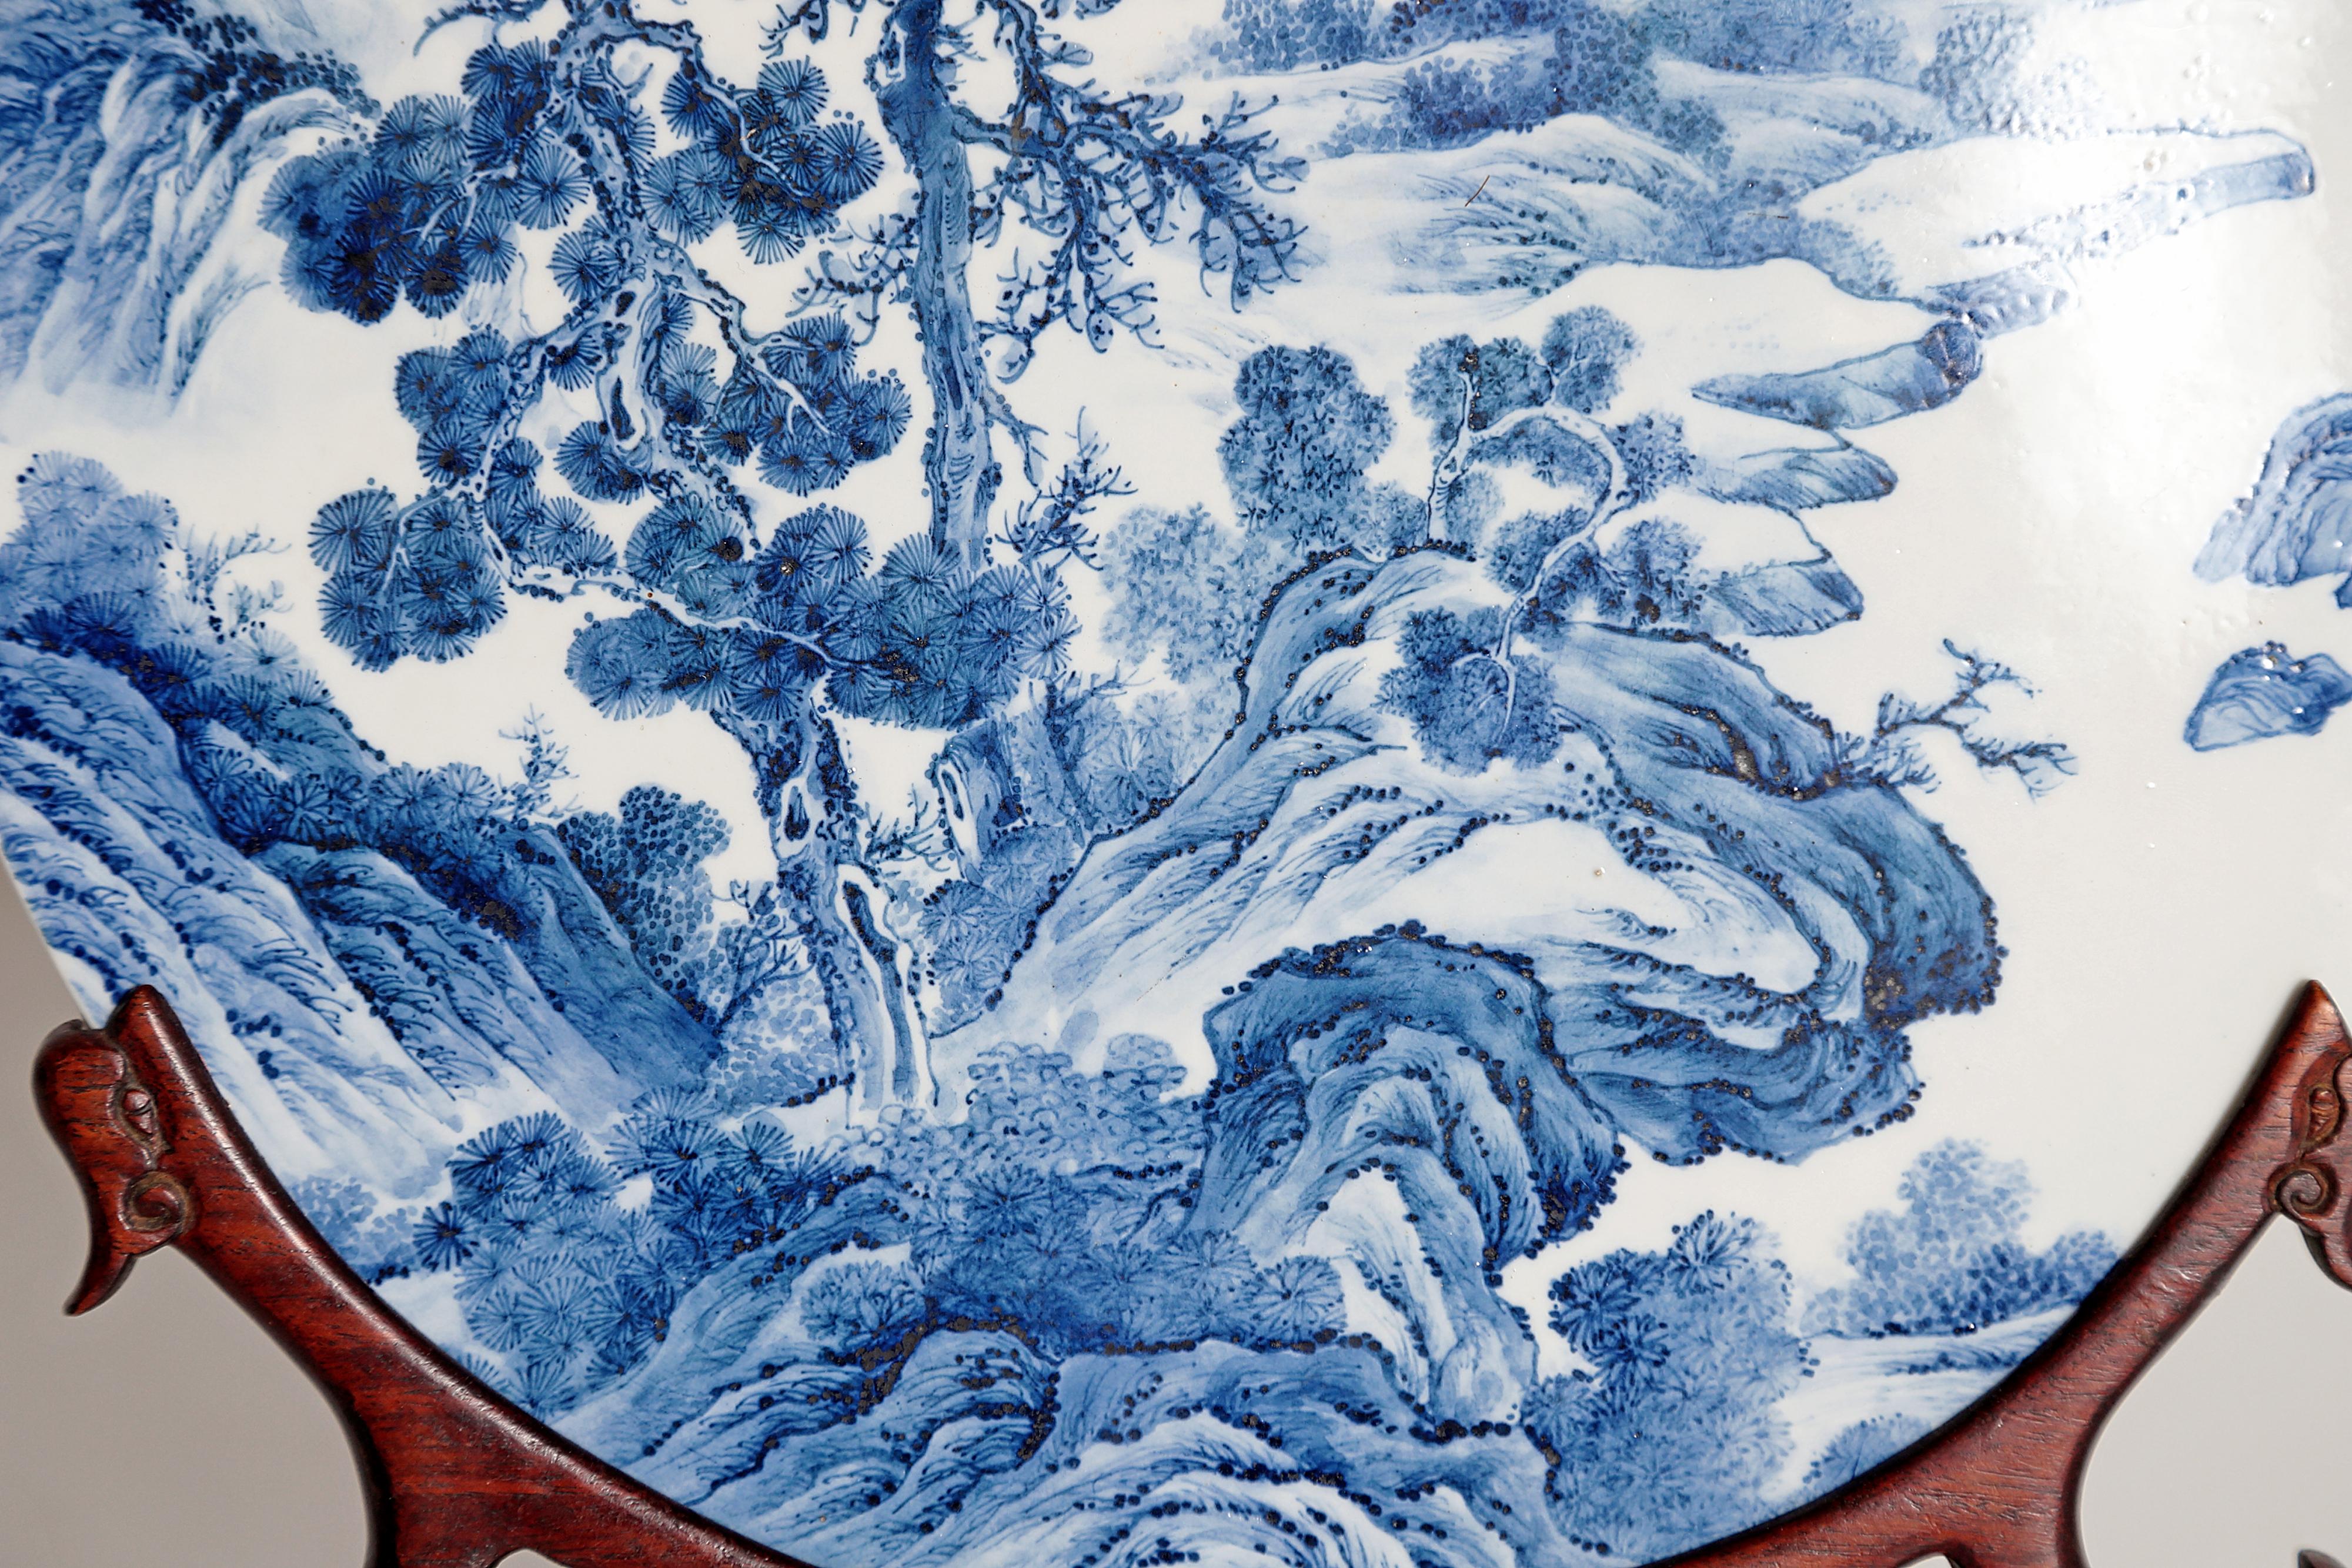 Hand-Carved Chinese Blue and White Porcelain Plaque with a Carved Wooden Stand